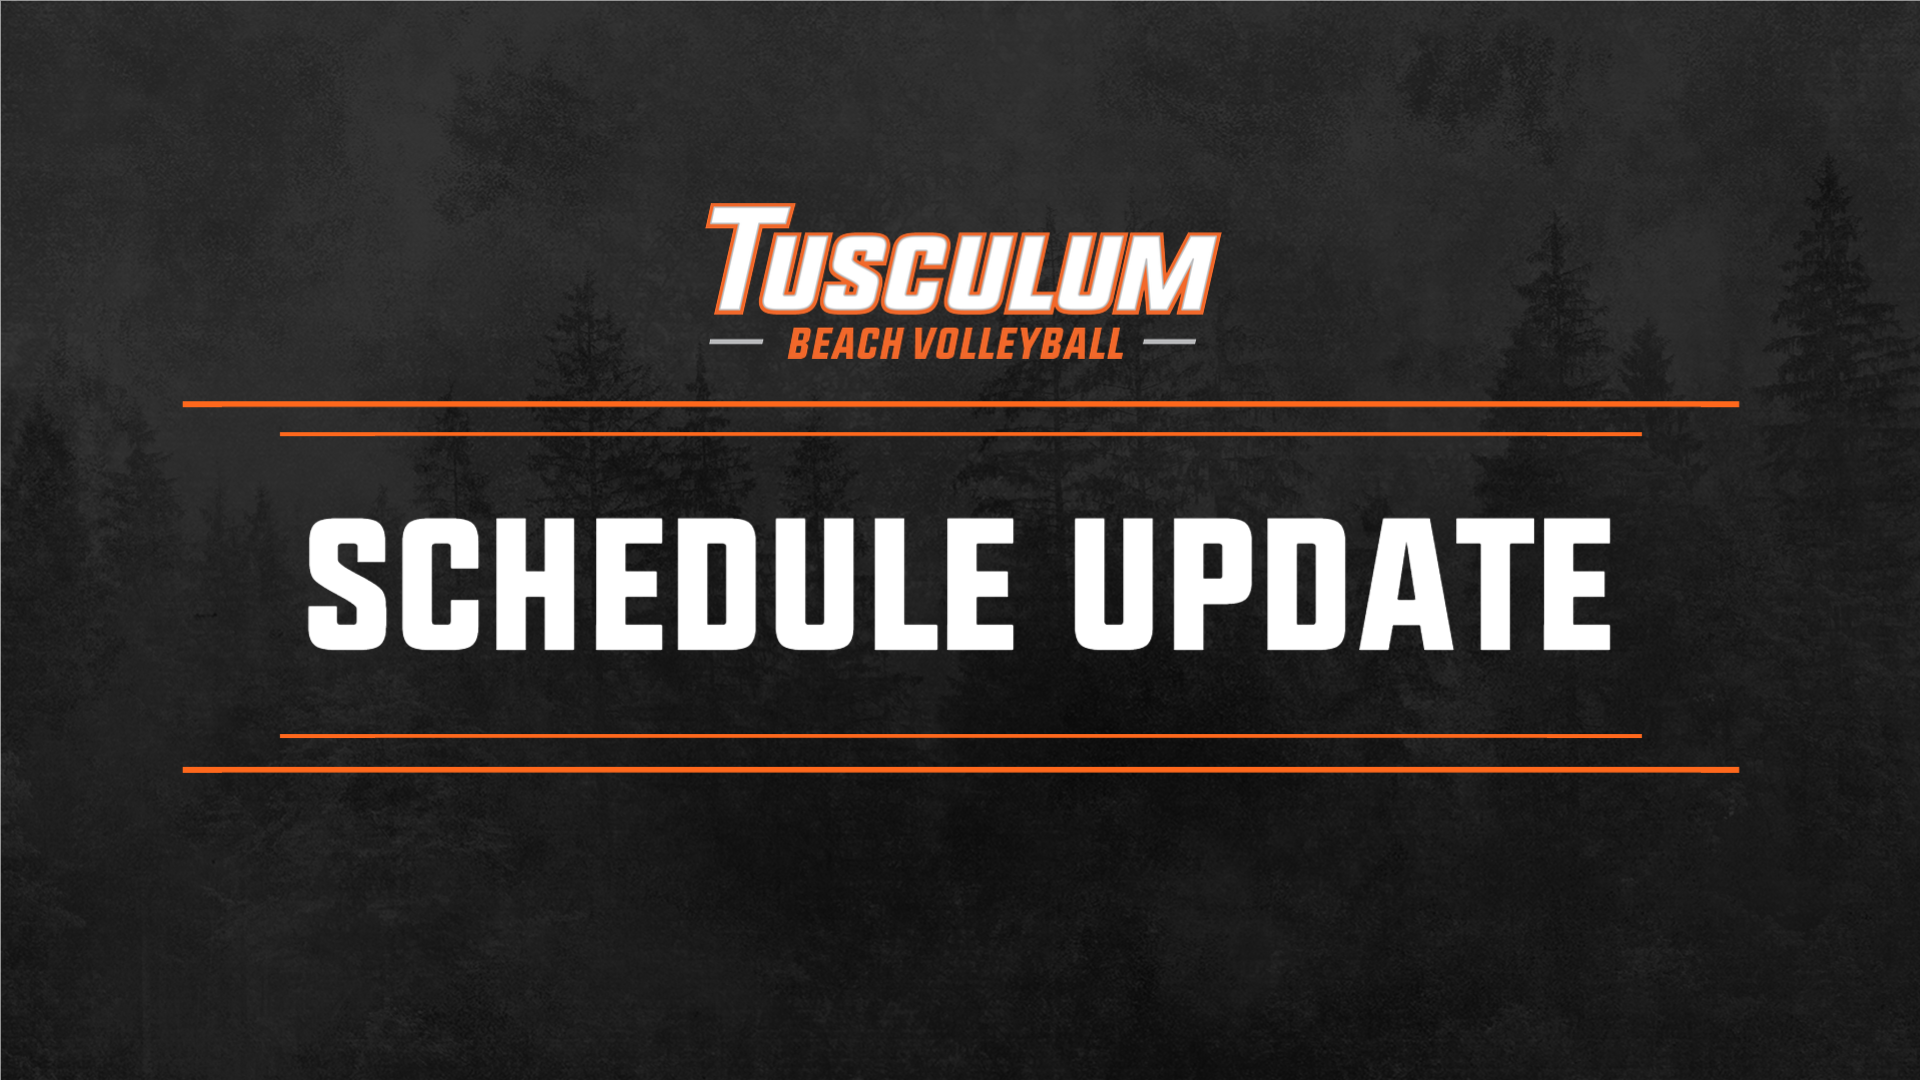 Tusculum, Morehead State moved up to Monday